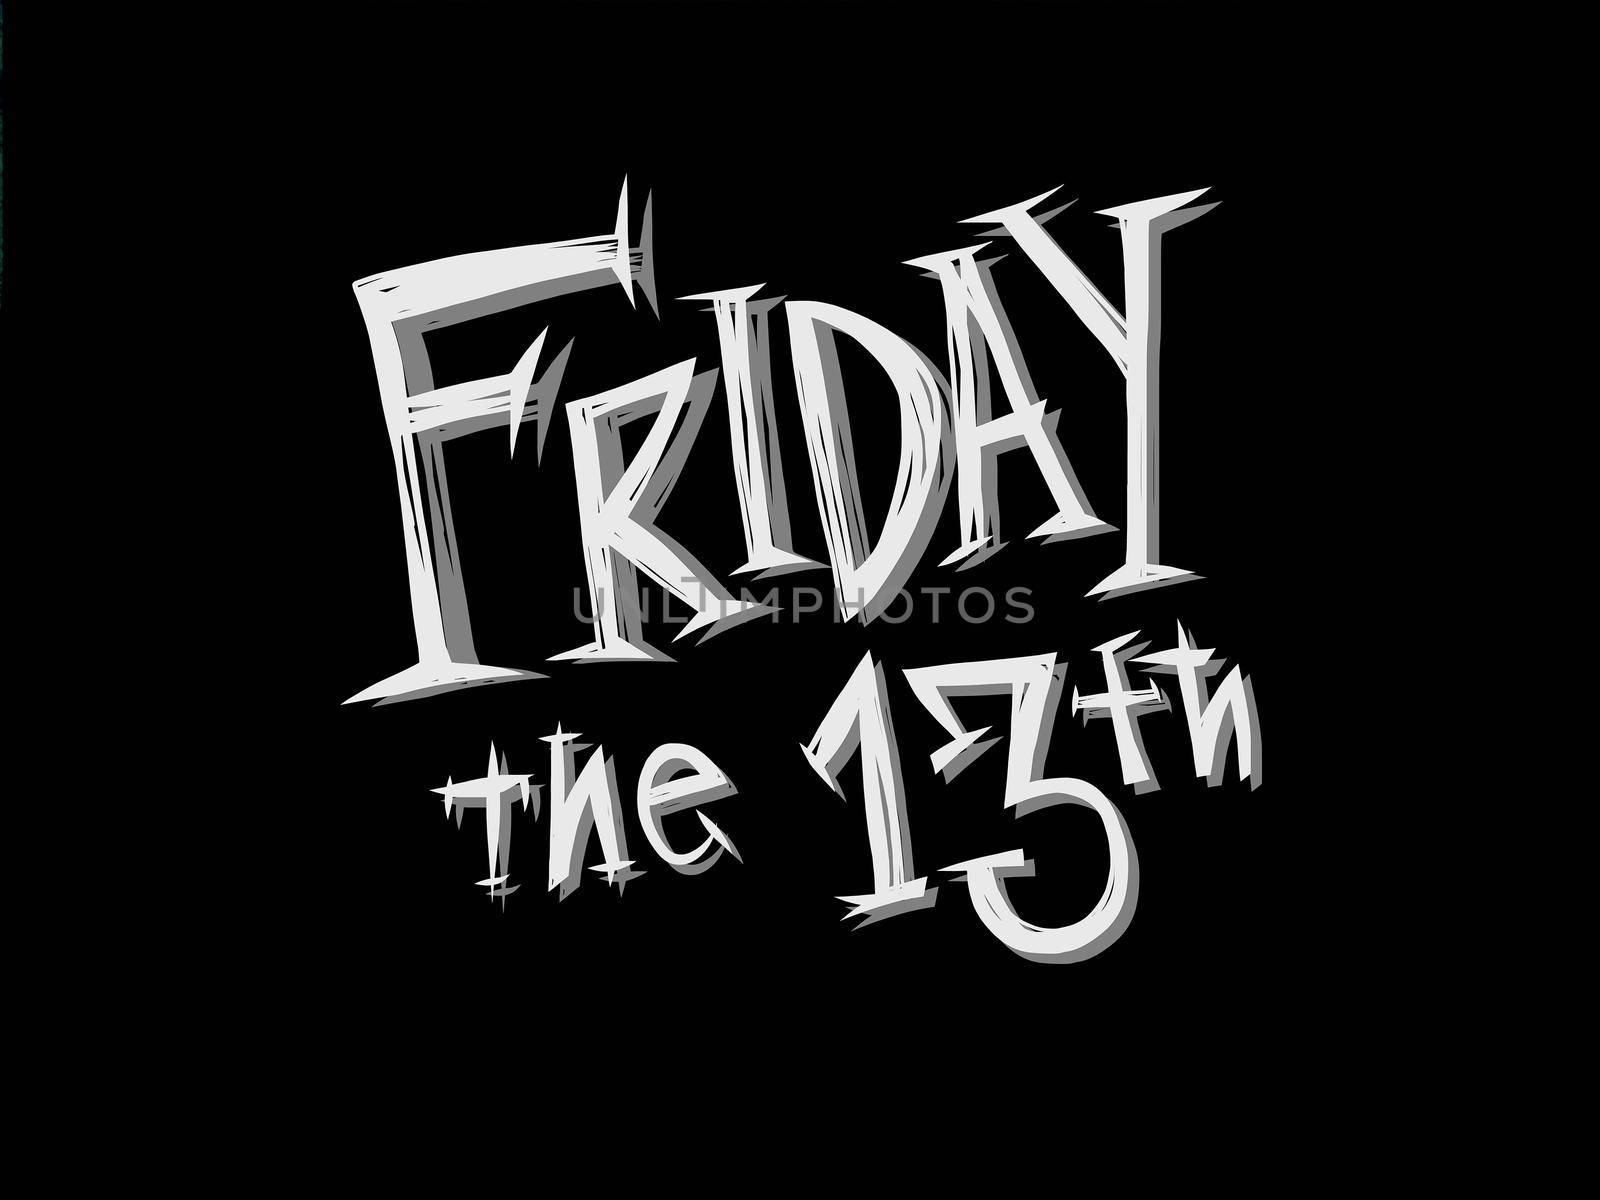 Friday 13th word lettering by Yoopho